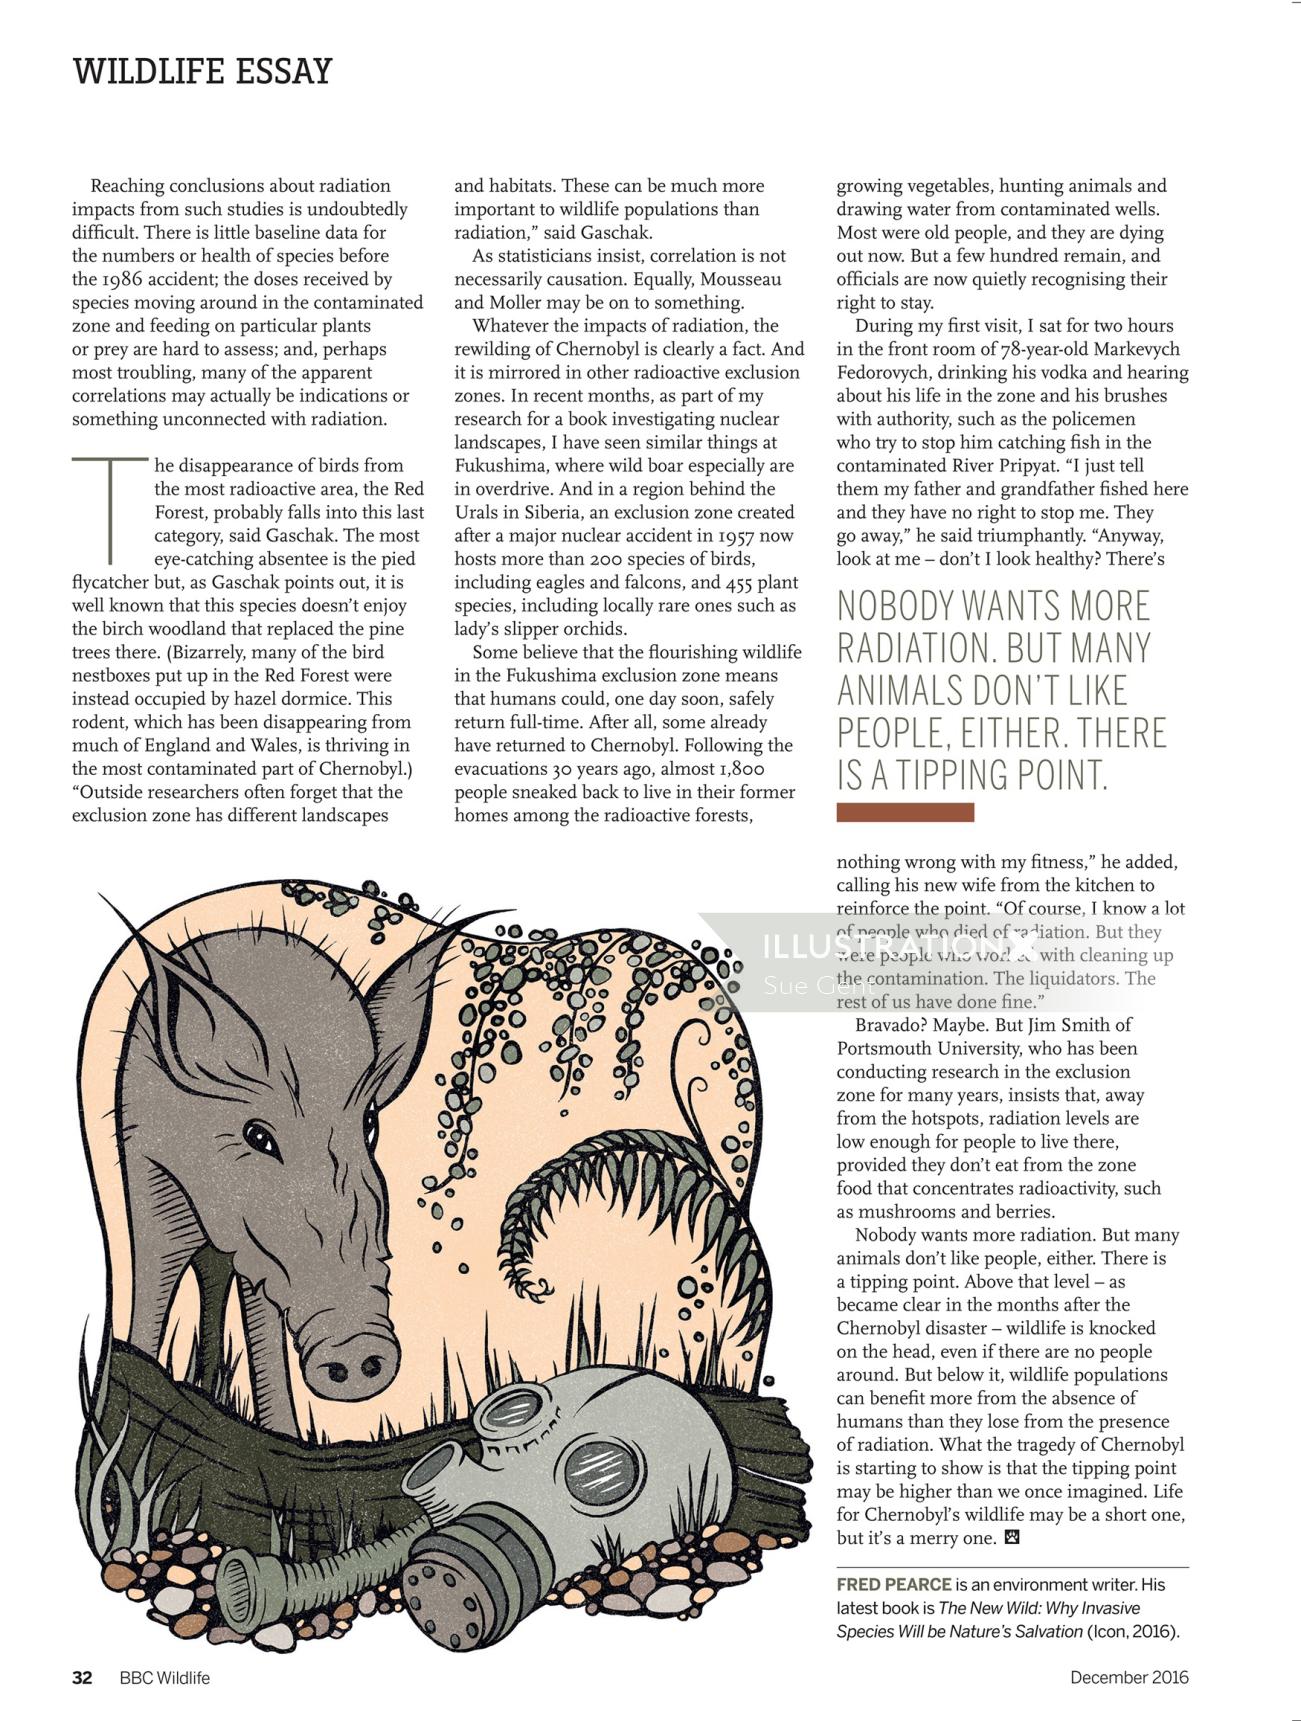 Editorial illustration of pig and mask
